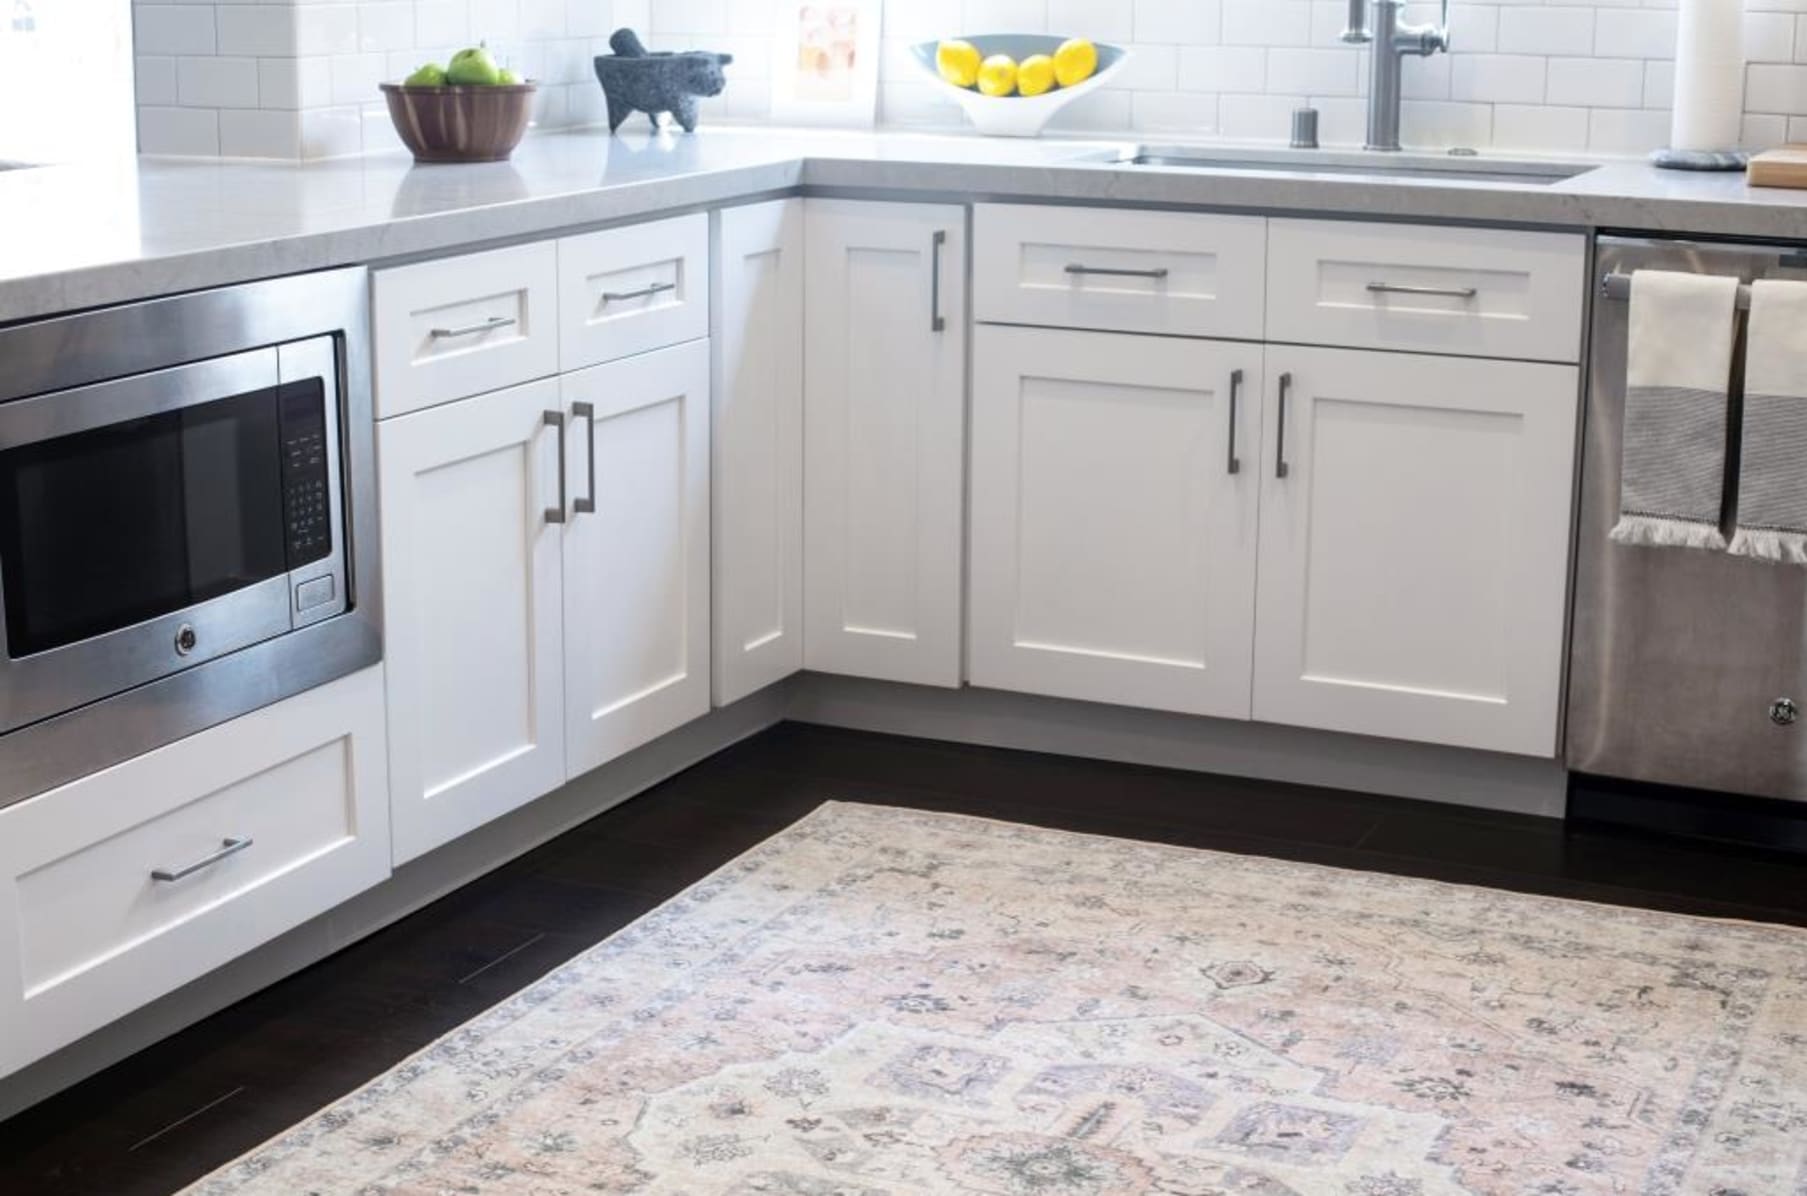 Review: Tumble's Spillproof and Machine Washable Rugs